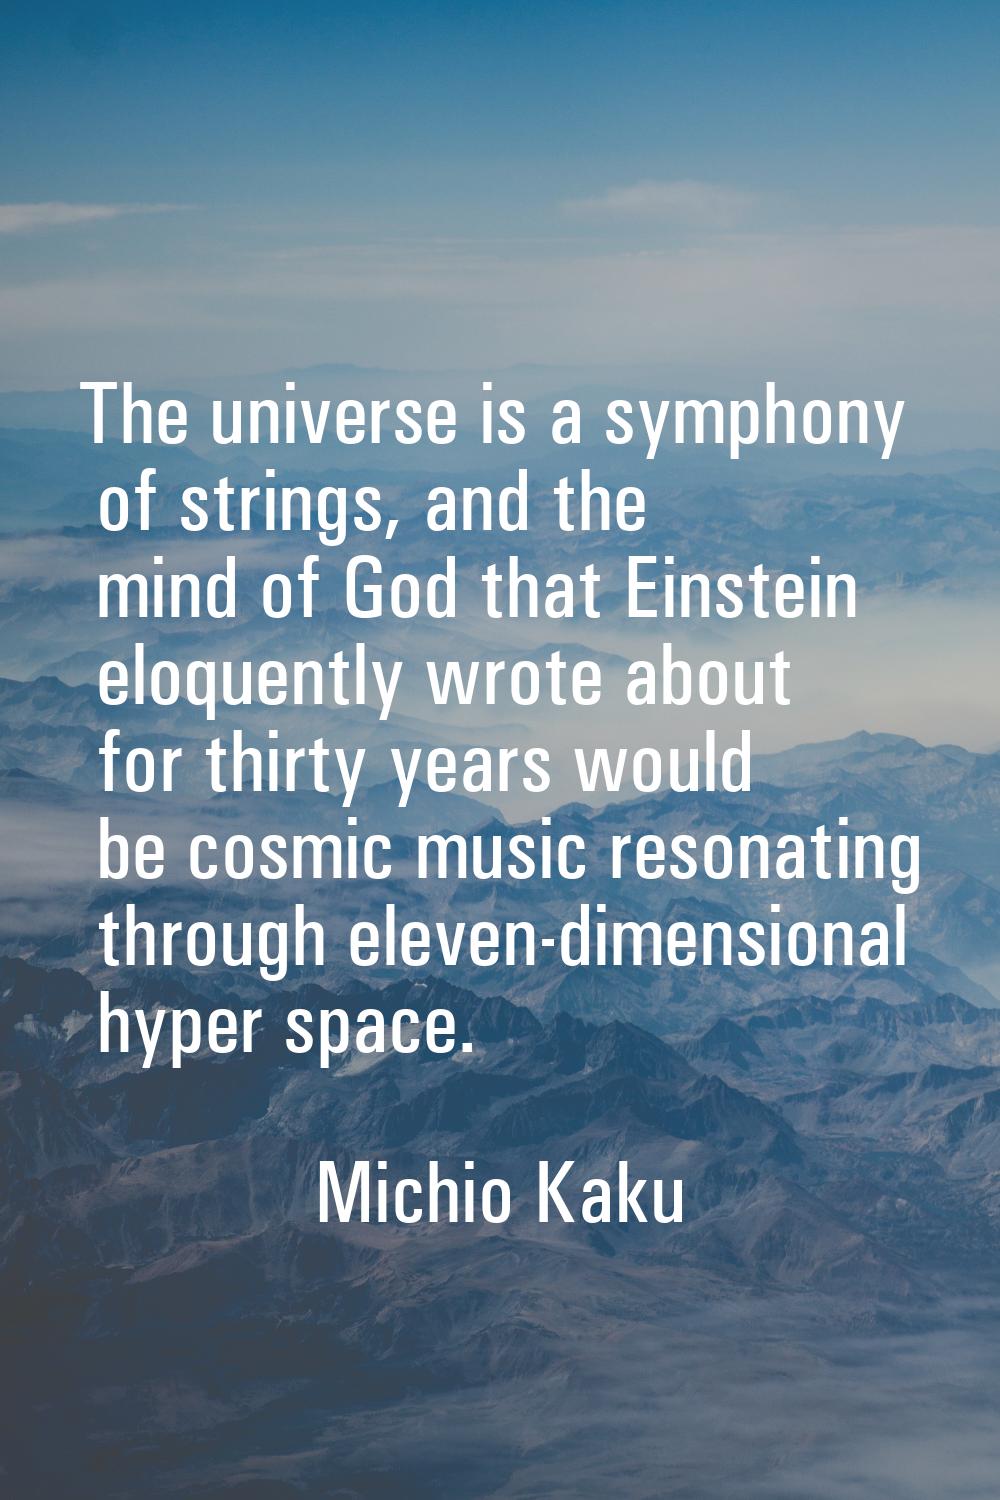 The universe is a symphony of strings, and the mind of God that Einstein eloquently wrote about for